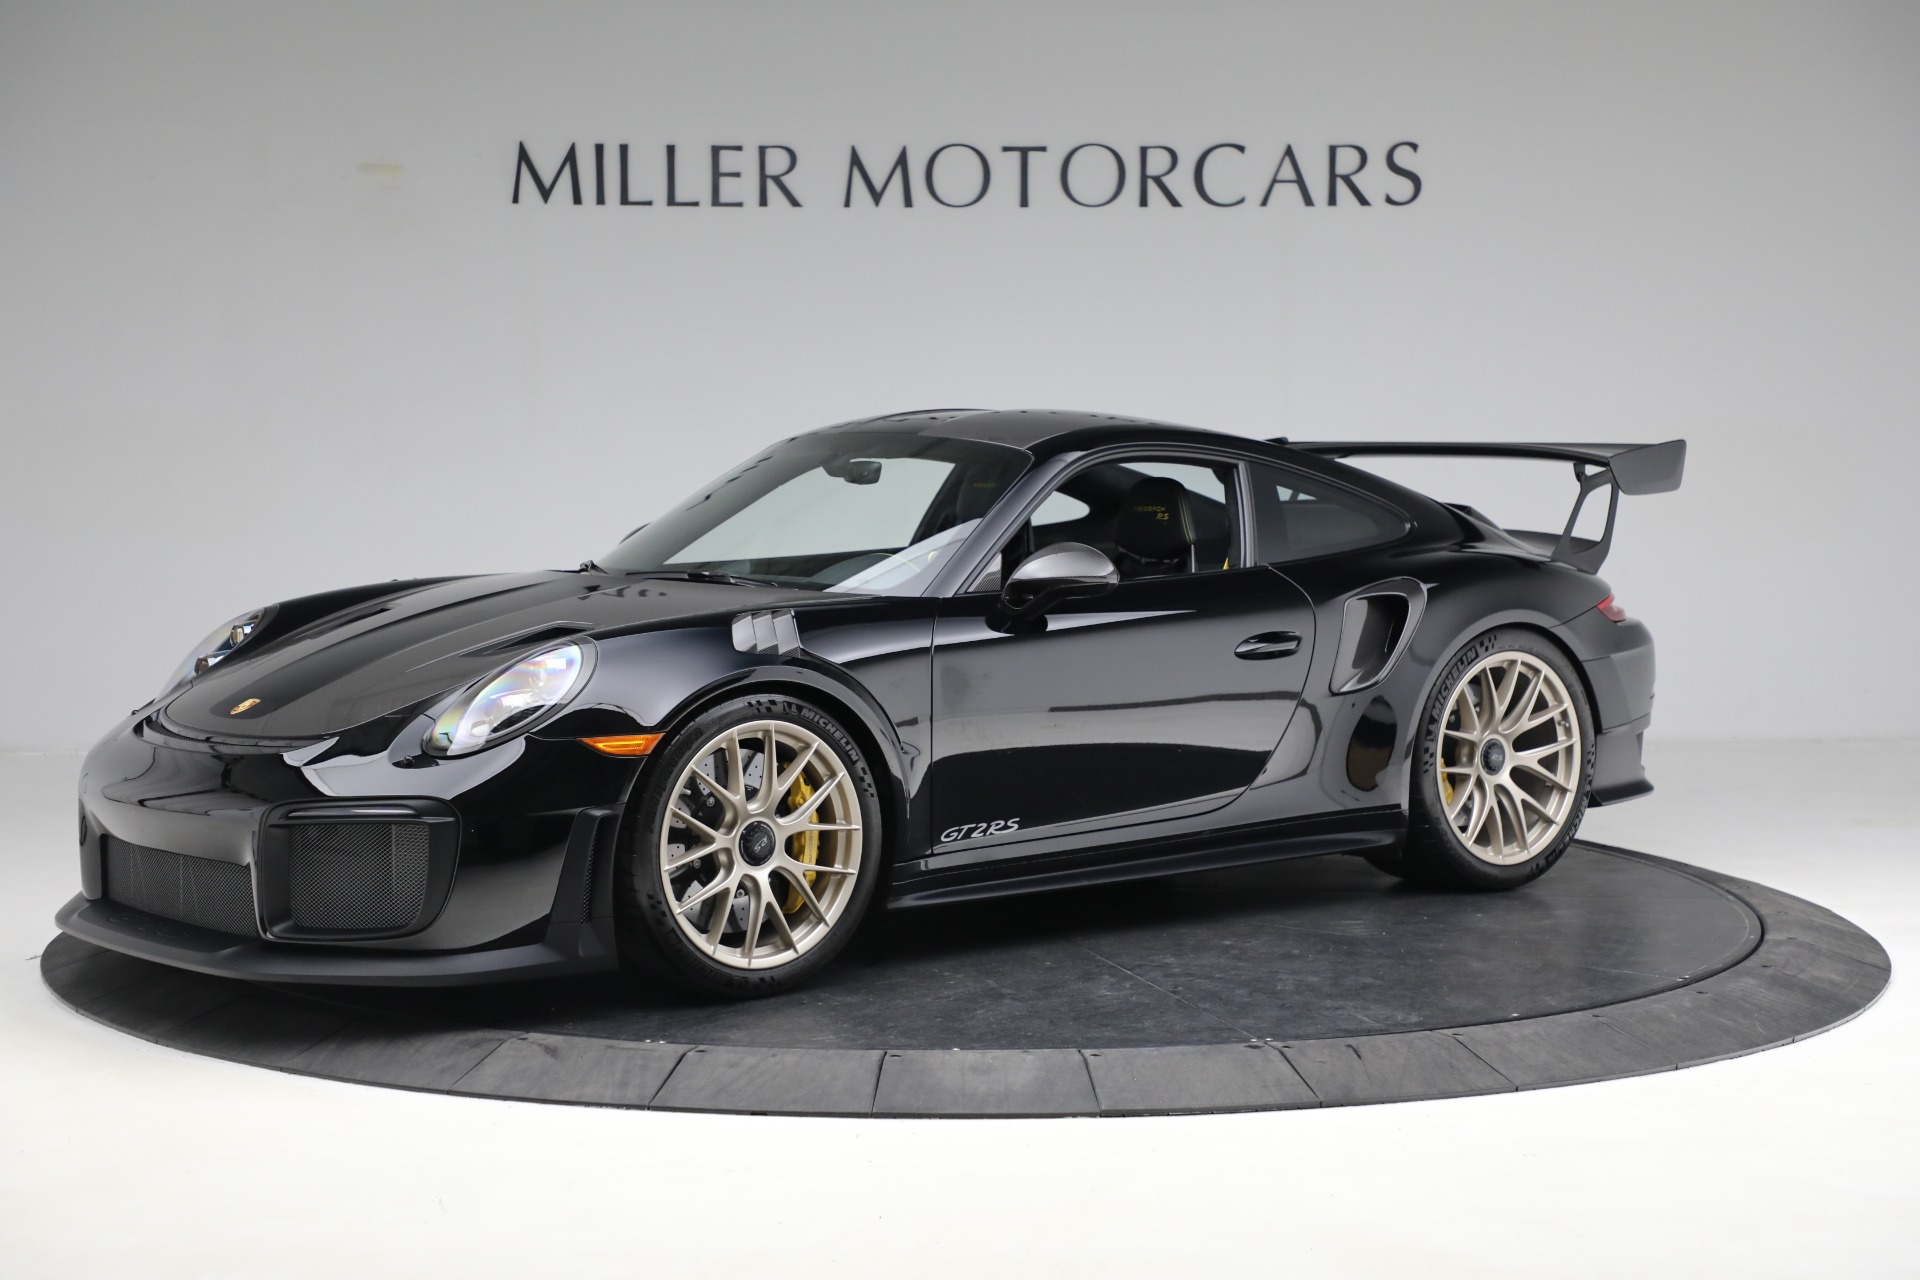 Used 2018 Porsche 911 GT2 RS for sale Sold at Aston Martin of Greenwich in Greenwich CT 06830 1